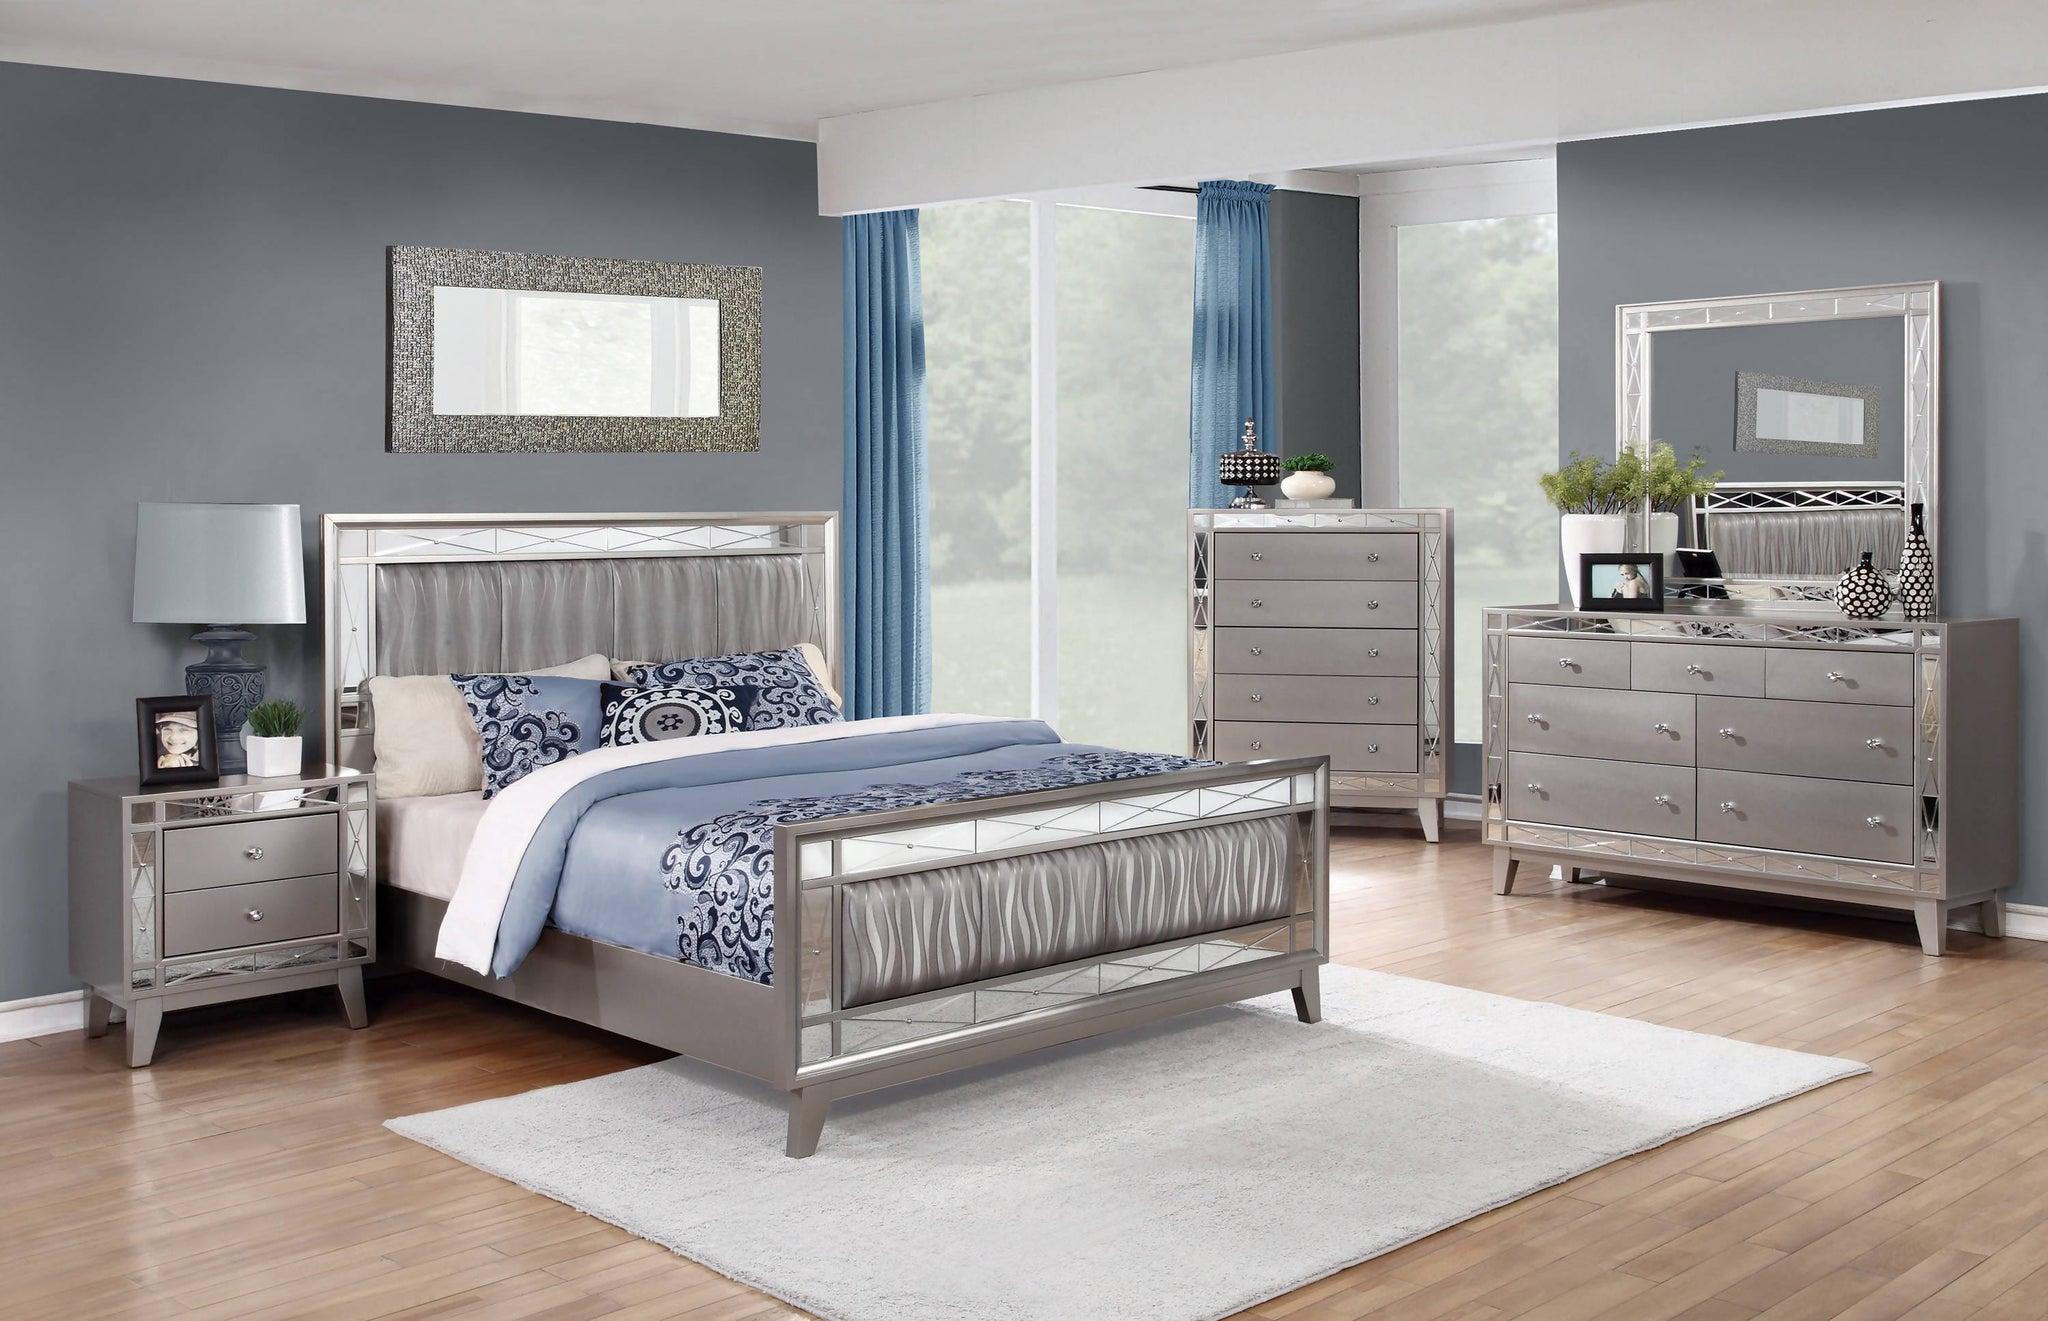 Leighton Queen Panel Bed With Mirrored Accents Mercury Metallic Collection: It Has An Upgraded Metallic Finish That Evokes Images Of Sparkling Mercury. This Bed Is An Absolute Delight For The Bedroom. Leighton SKU: 204921Q